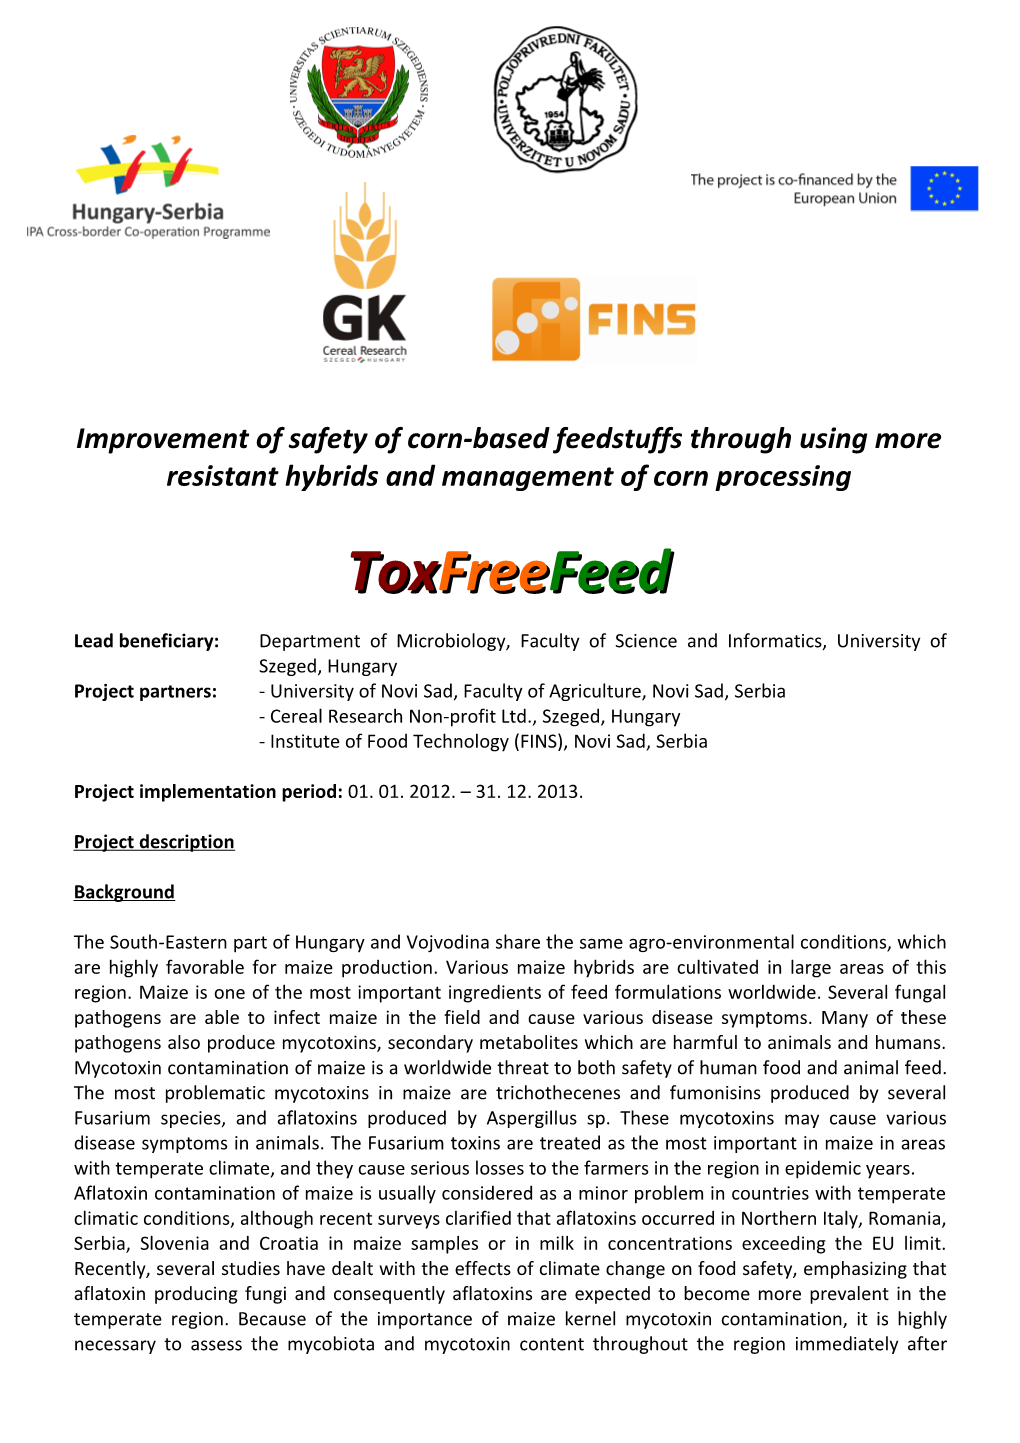 Improvement of Safety of Corn-Based Feedstuffs Through Using More Resistant Hybrids And